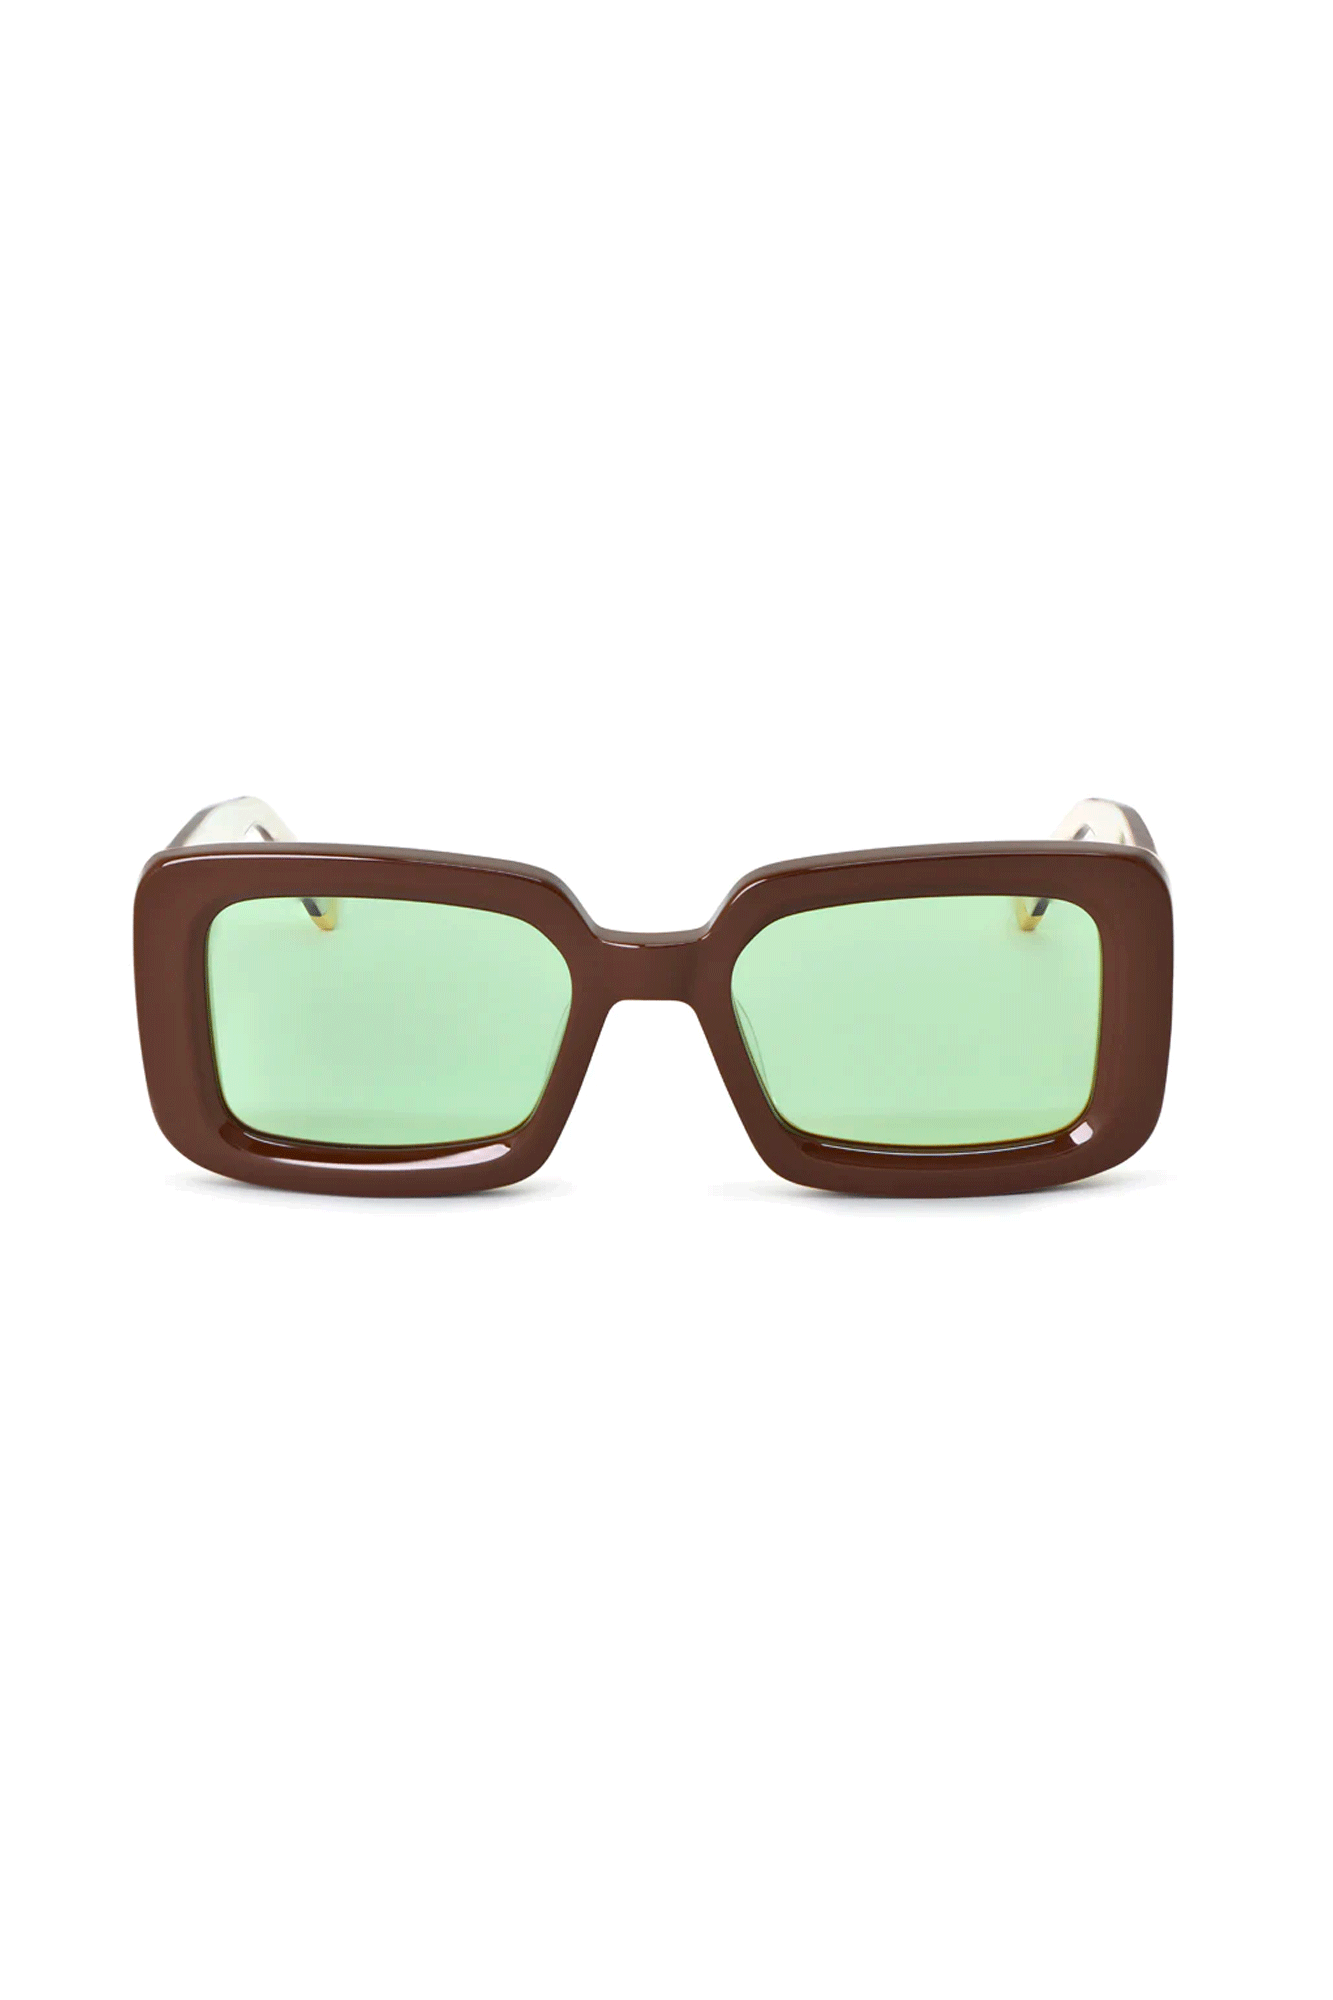 Las Palmas - Brown/Cream sunglasses from Oscar x Frank combine classic frame design with contemporary materials. The lightweight frames combined with the blocking lenses provide protection from the sun’s harmful rays while looking stylish.